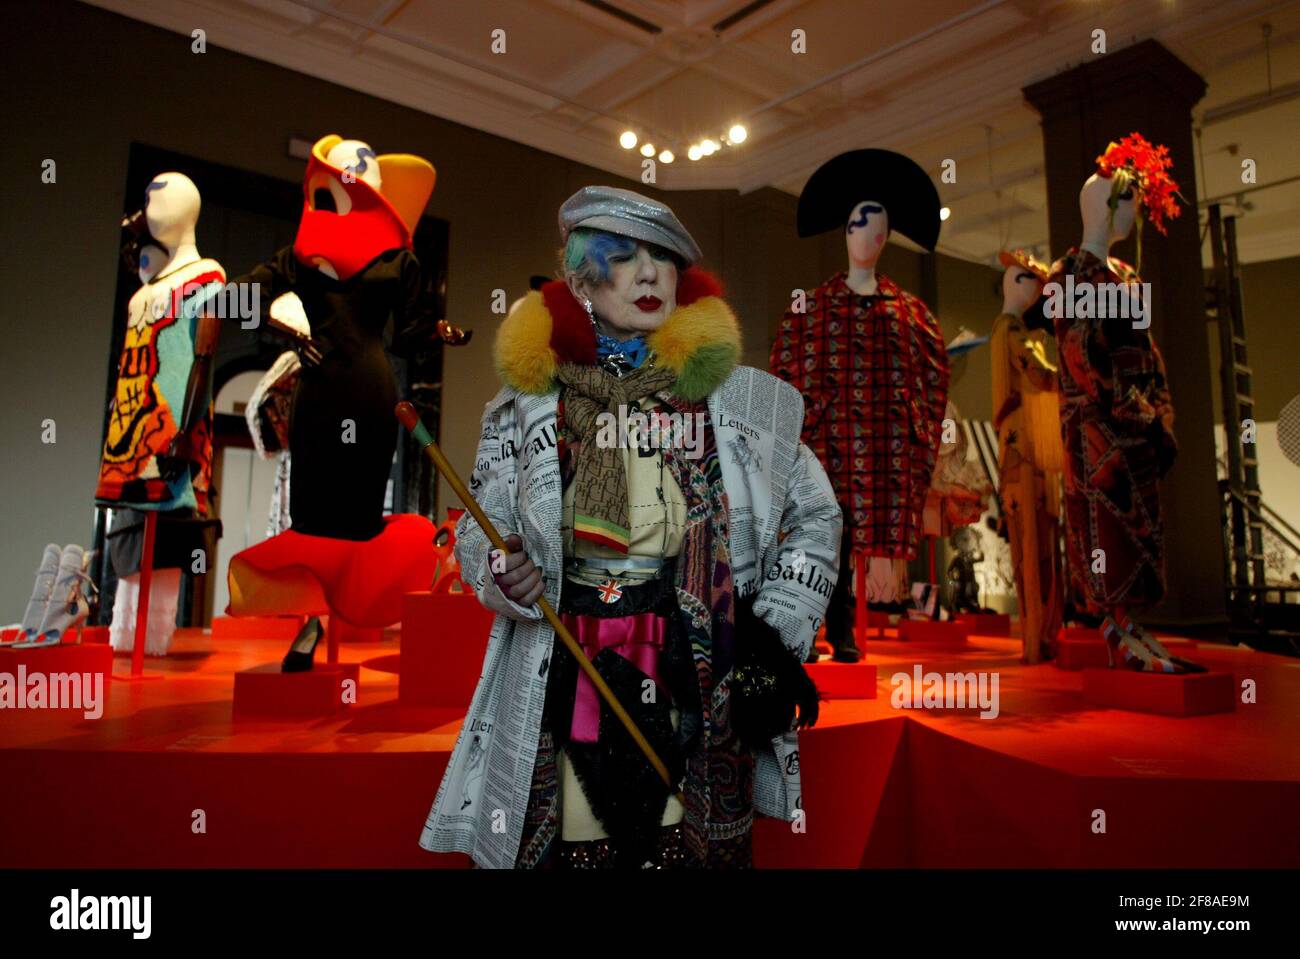 Anna Piaggi in her  FASHION-OLOGY exhibition held at the Victoria and Albert Museum in London, the exhibition runs from 2 Feb to 23 April 2006.pic David Sandison 30/6/2006 Stock Photo